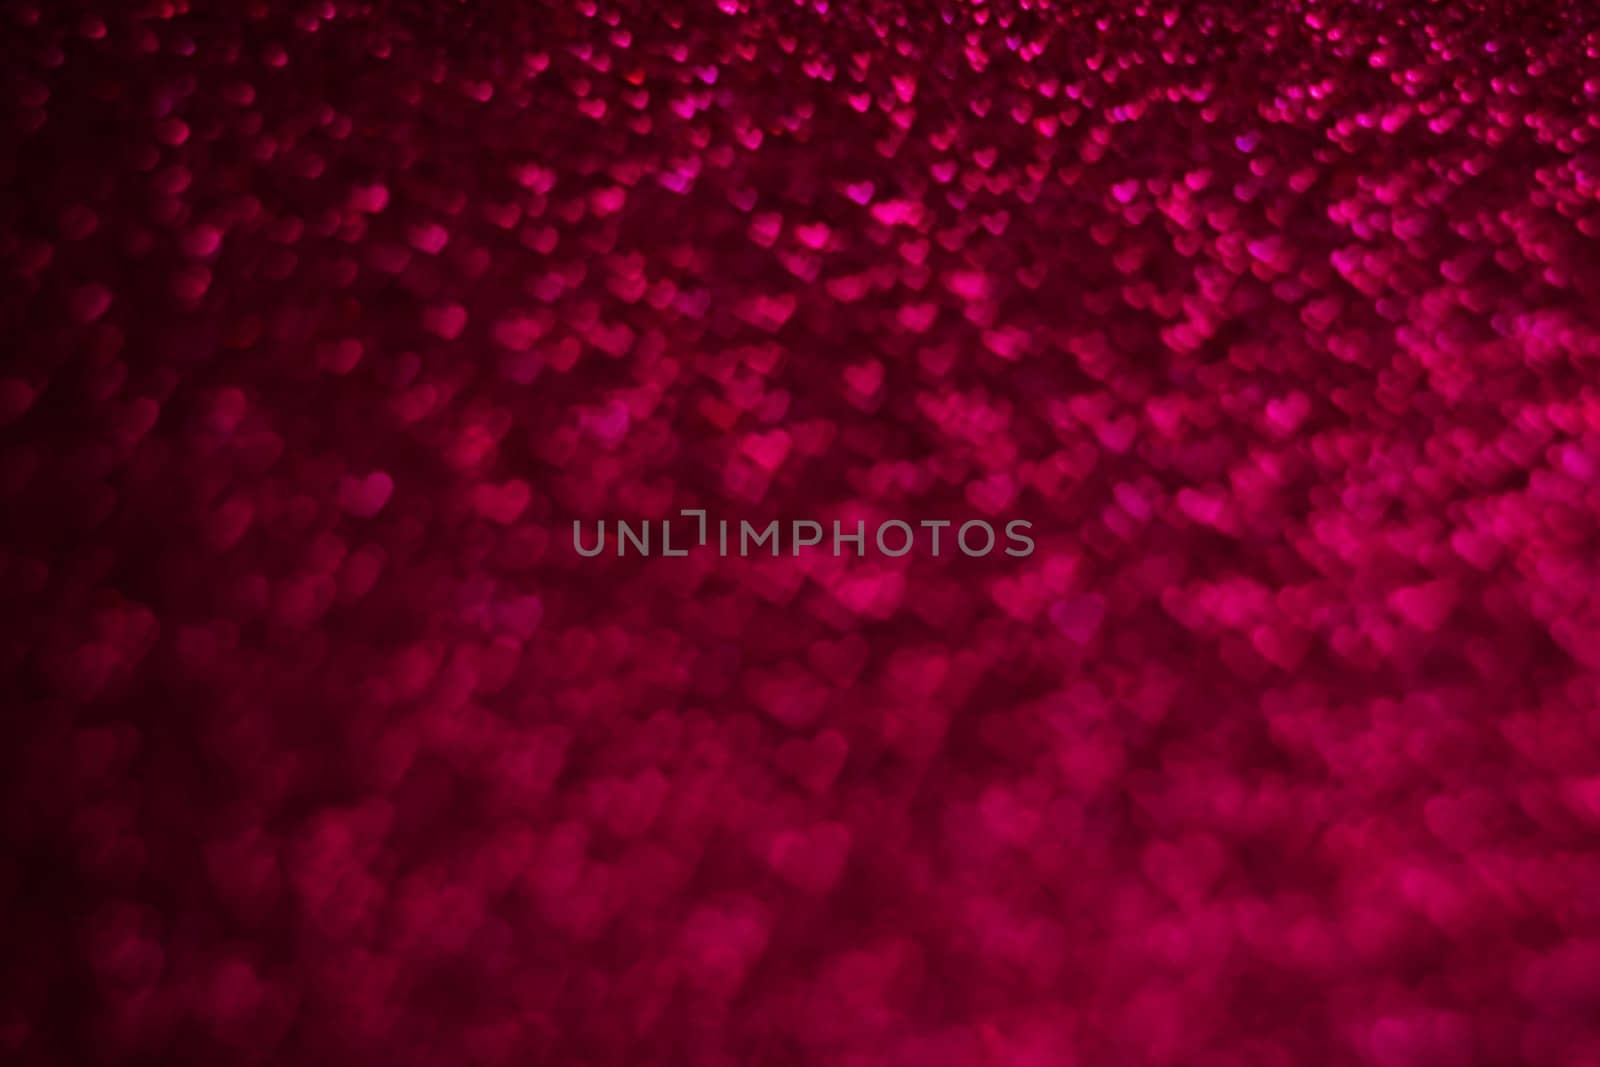 A close up of a red background with many small heart shapes scattered throughout. Concept of love and warmth, as the hearts are arranged in a way that creates a cozy and intimate atmosphere